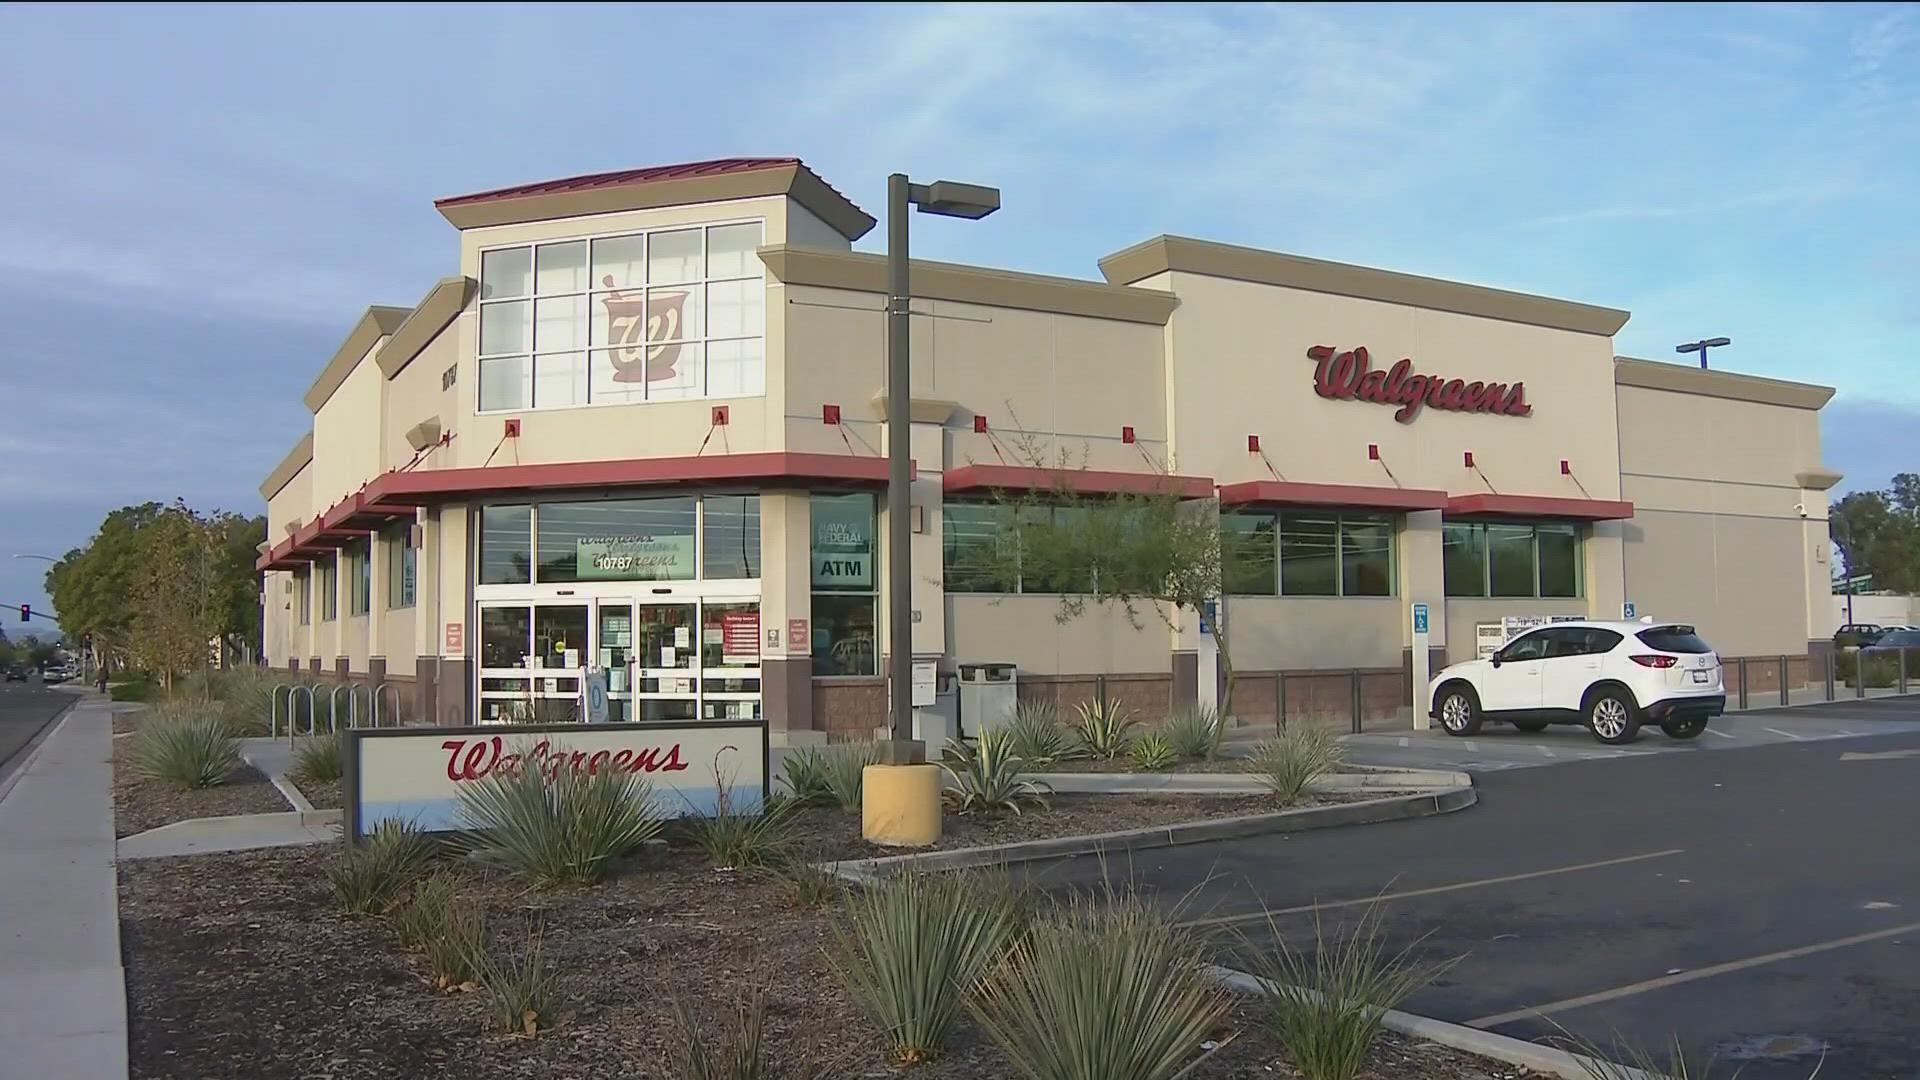 California expected to oust Walgreens after the company restricted access to abortion pills.